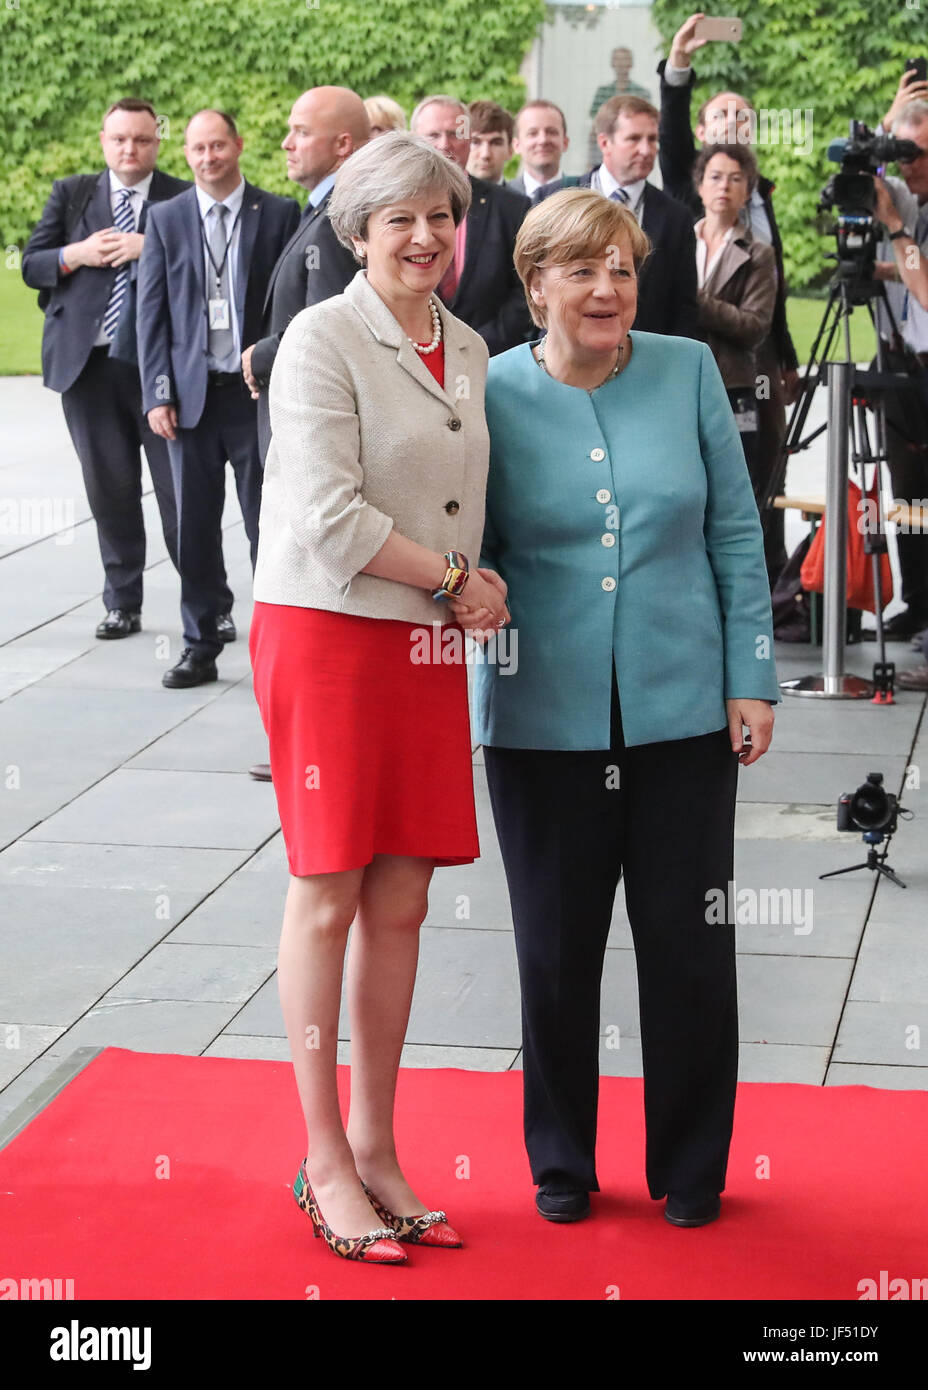 Berlin, Germany. 29th June, 2017. German Chancellor Angela Merkel (R) poses for photos with British Prime Minister Theresa May (L) before the preparation meeting for G20 at German Chancellery in Berlin, capital of Germany, on June 29, 2017. Credit: Shan Yuqi/Xinhua/Alamy Live News Stock Photo